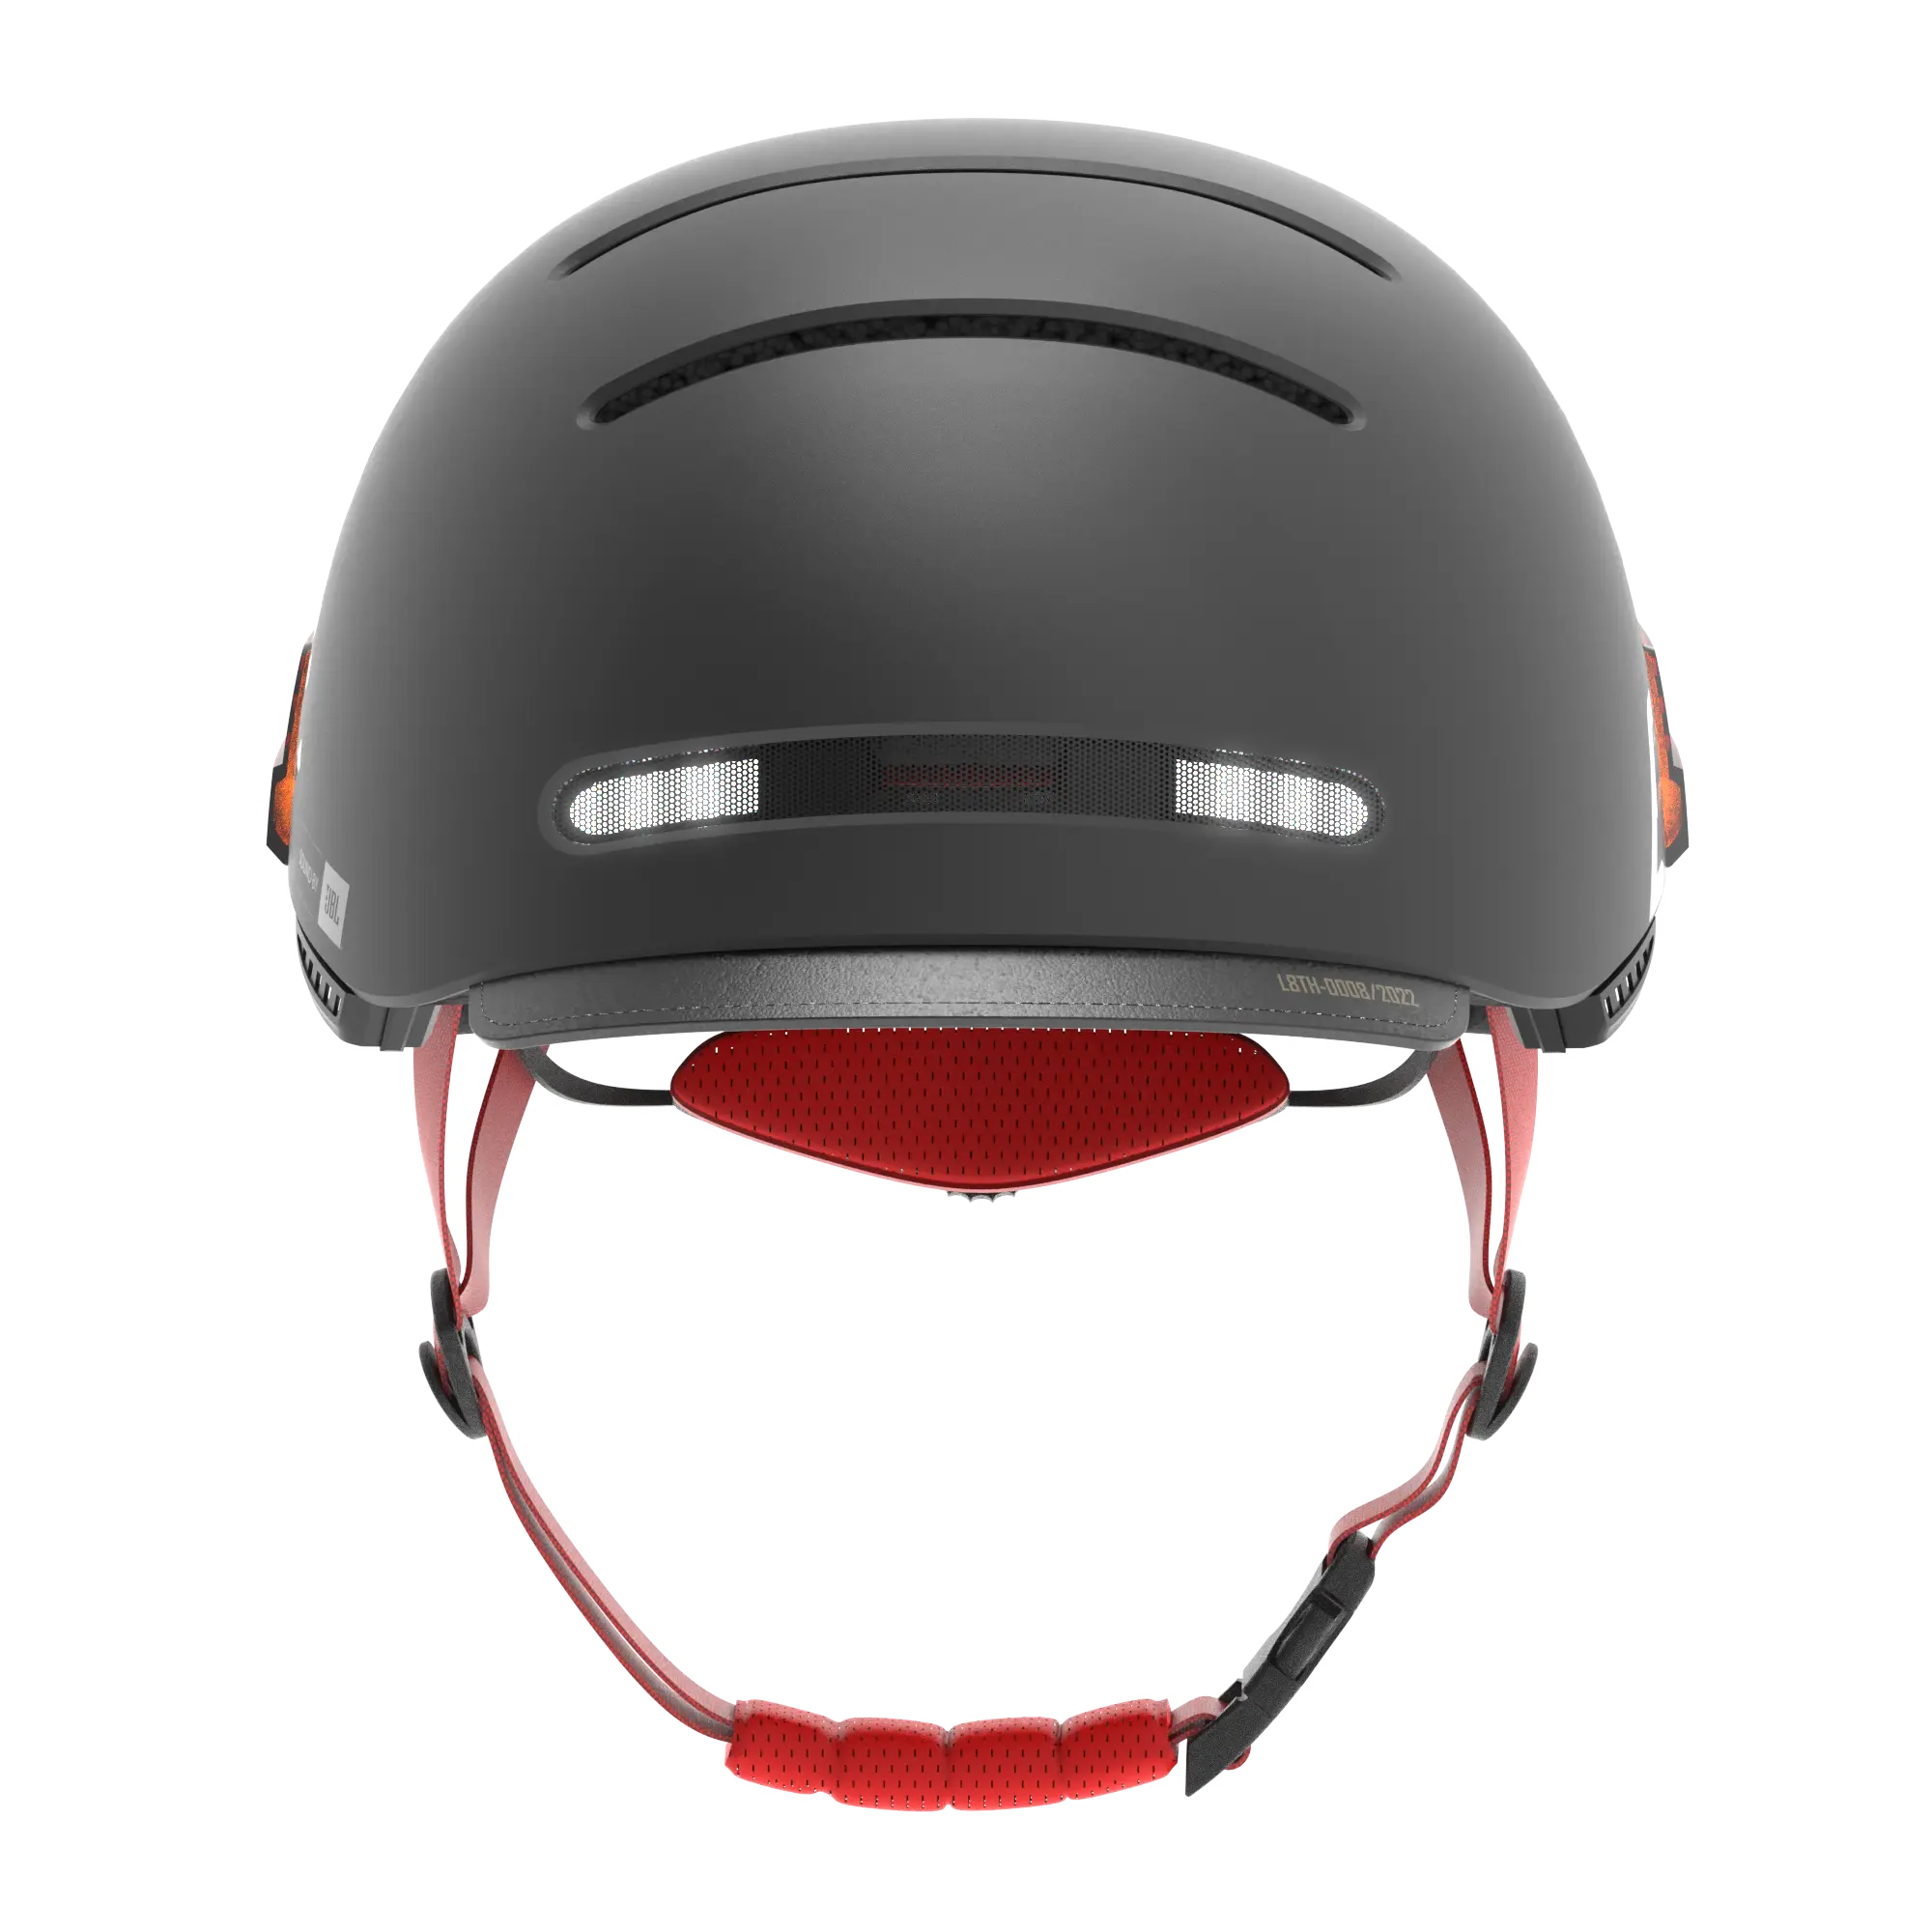 LIVALL Smart Helmet with JBL Sound for a Safe and Enjoyable Ride8